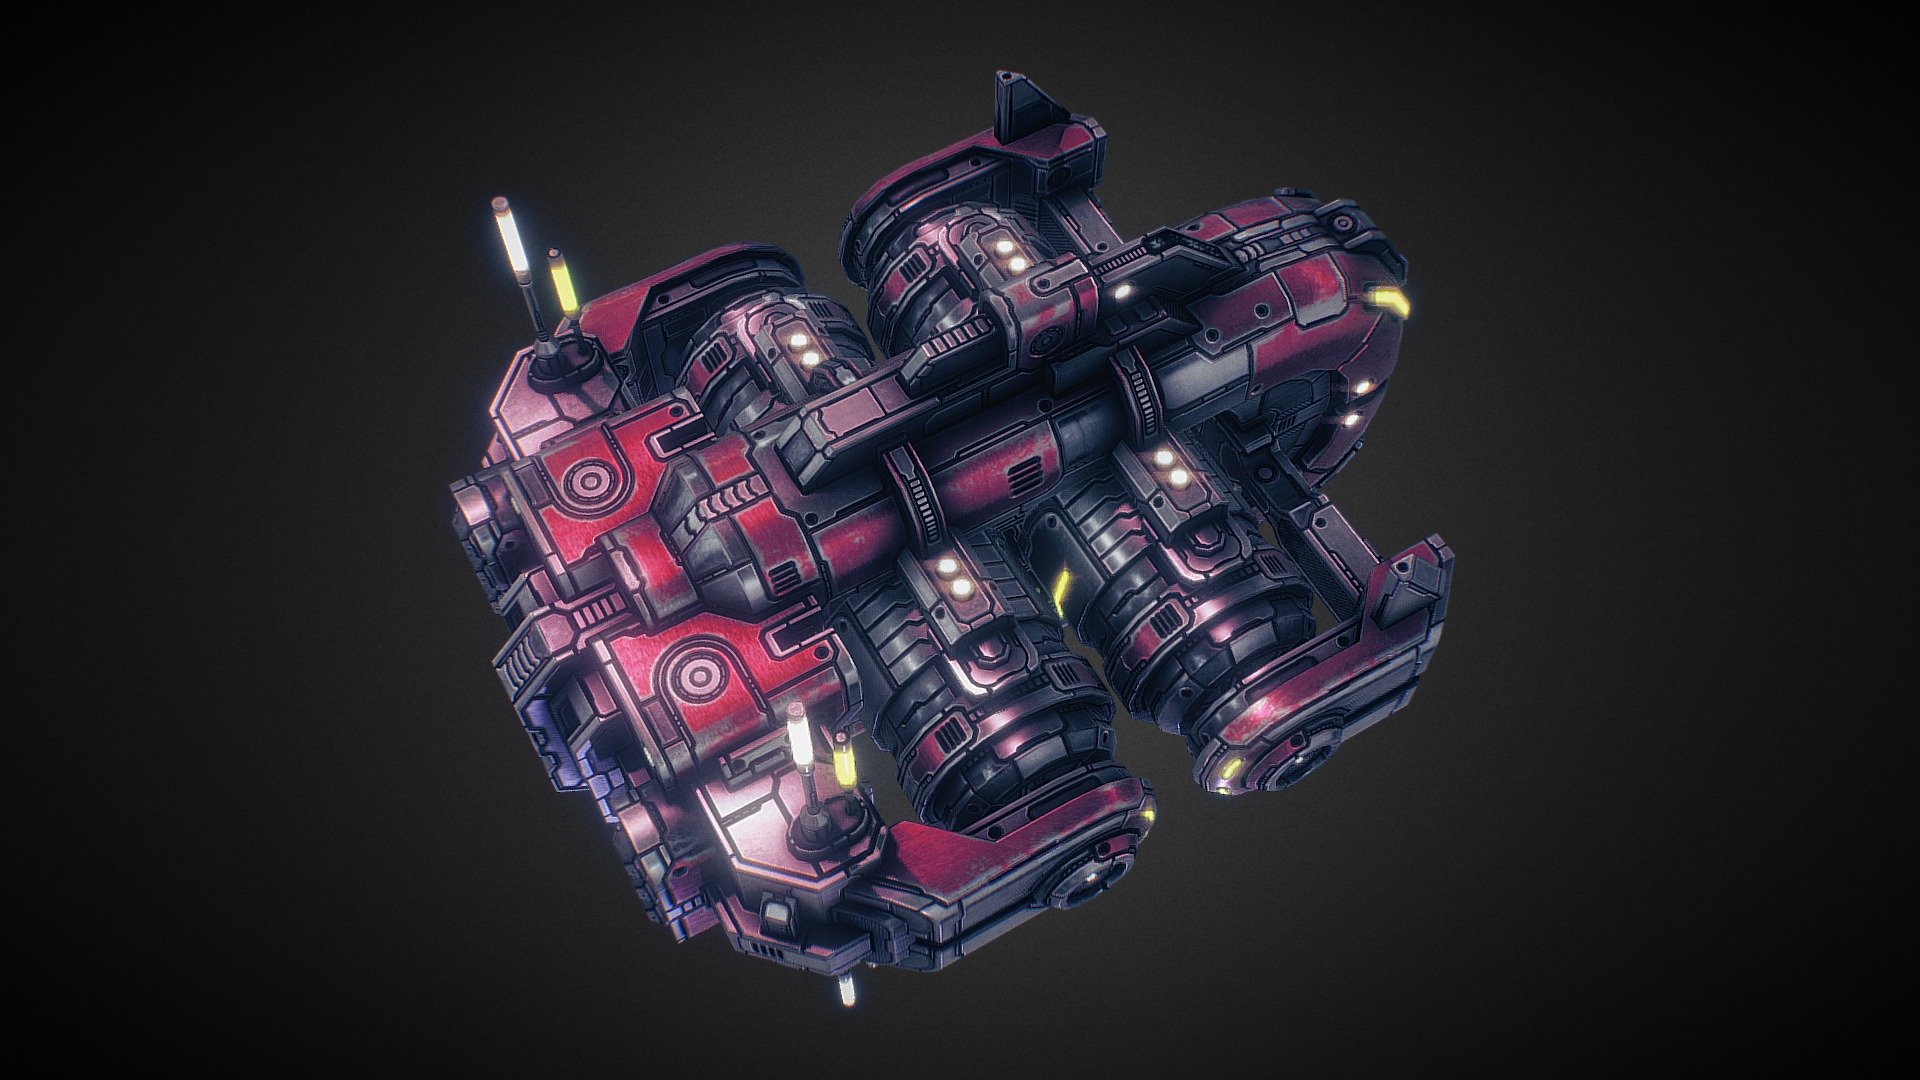 In-game model of a small cargo hauling spaceship belonging to the Vanguard faction. Learn more about the game at http://starfalltactics.com/ - Starfall Tactics — Sampo Vanguard freighter - 3D model by Snowforged Entertainment (@snowforged) 3d model